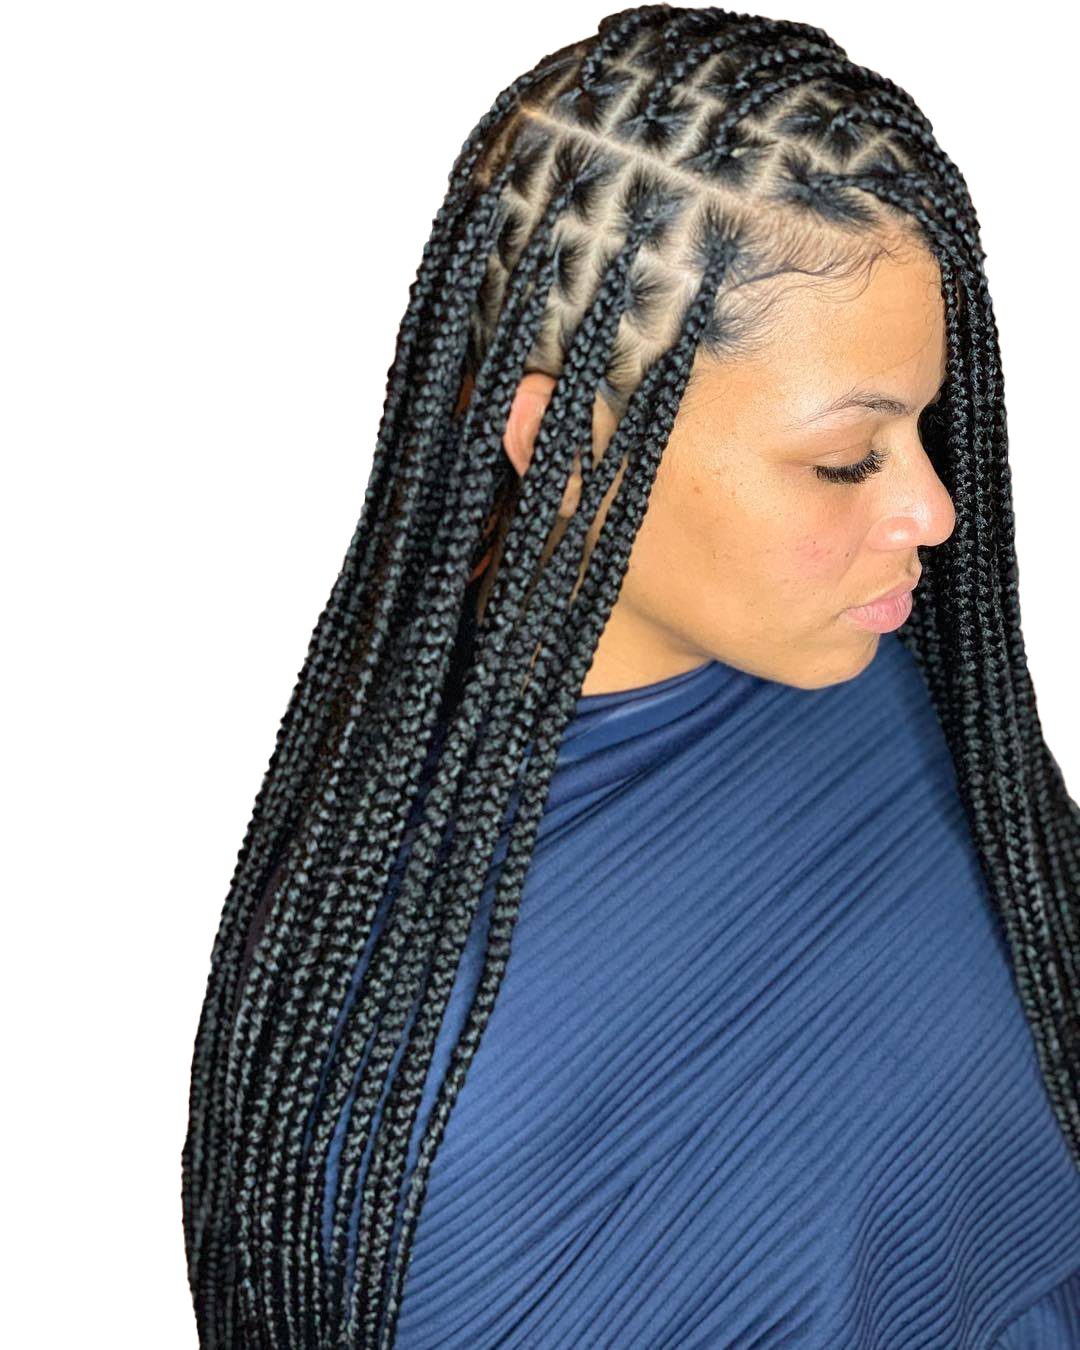 Braids Hairstyle PNG Transparent Picture